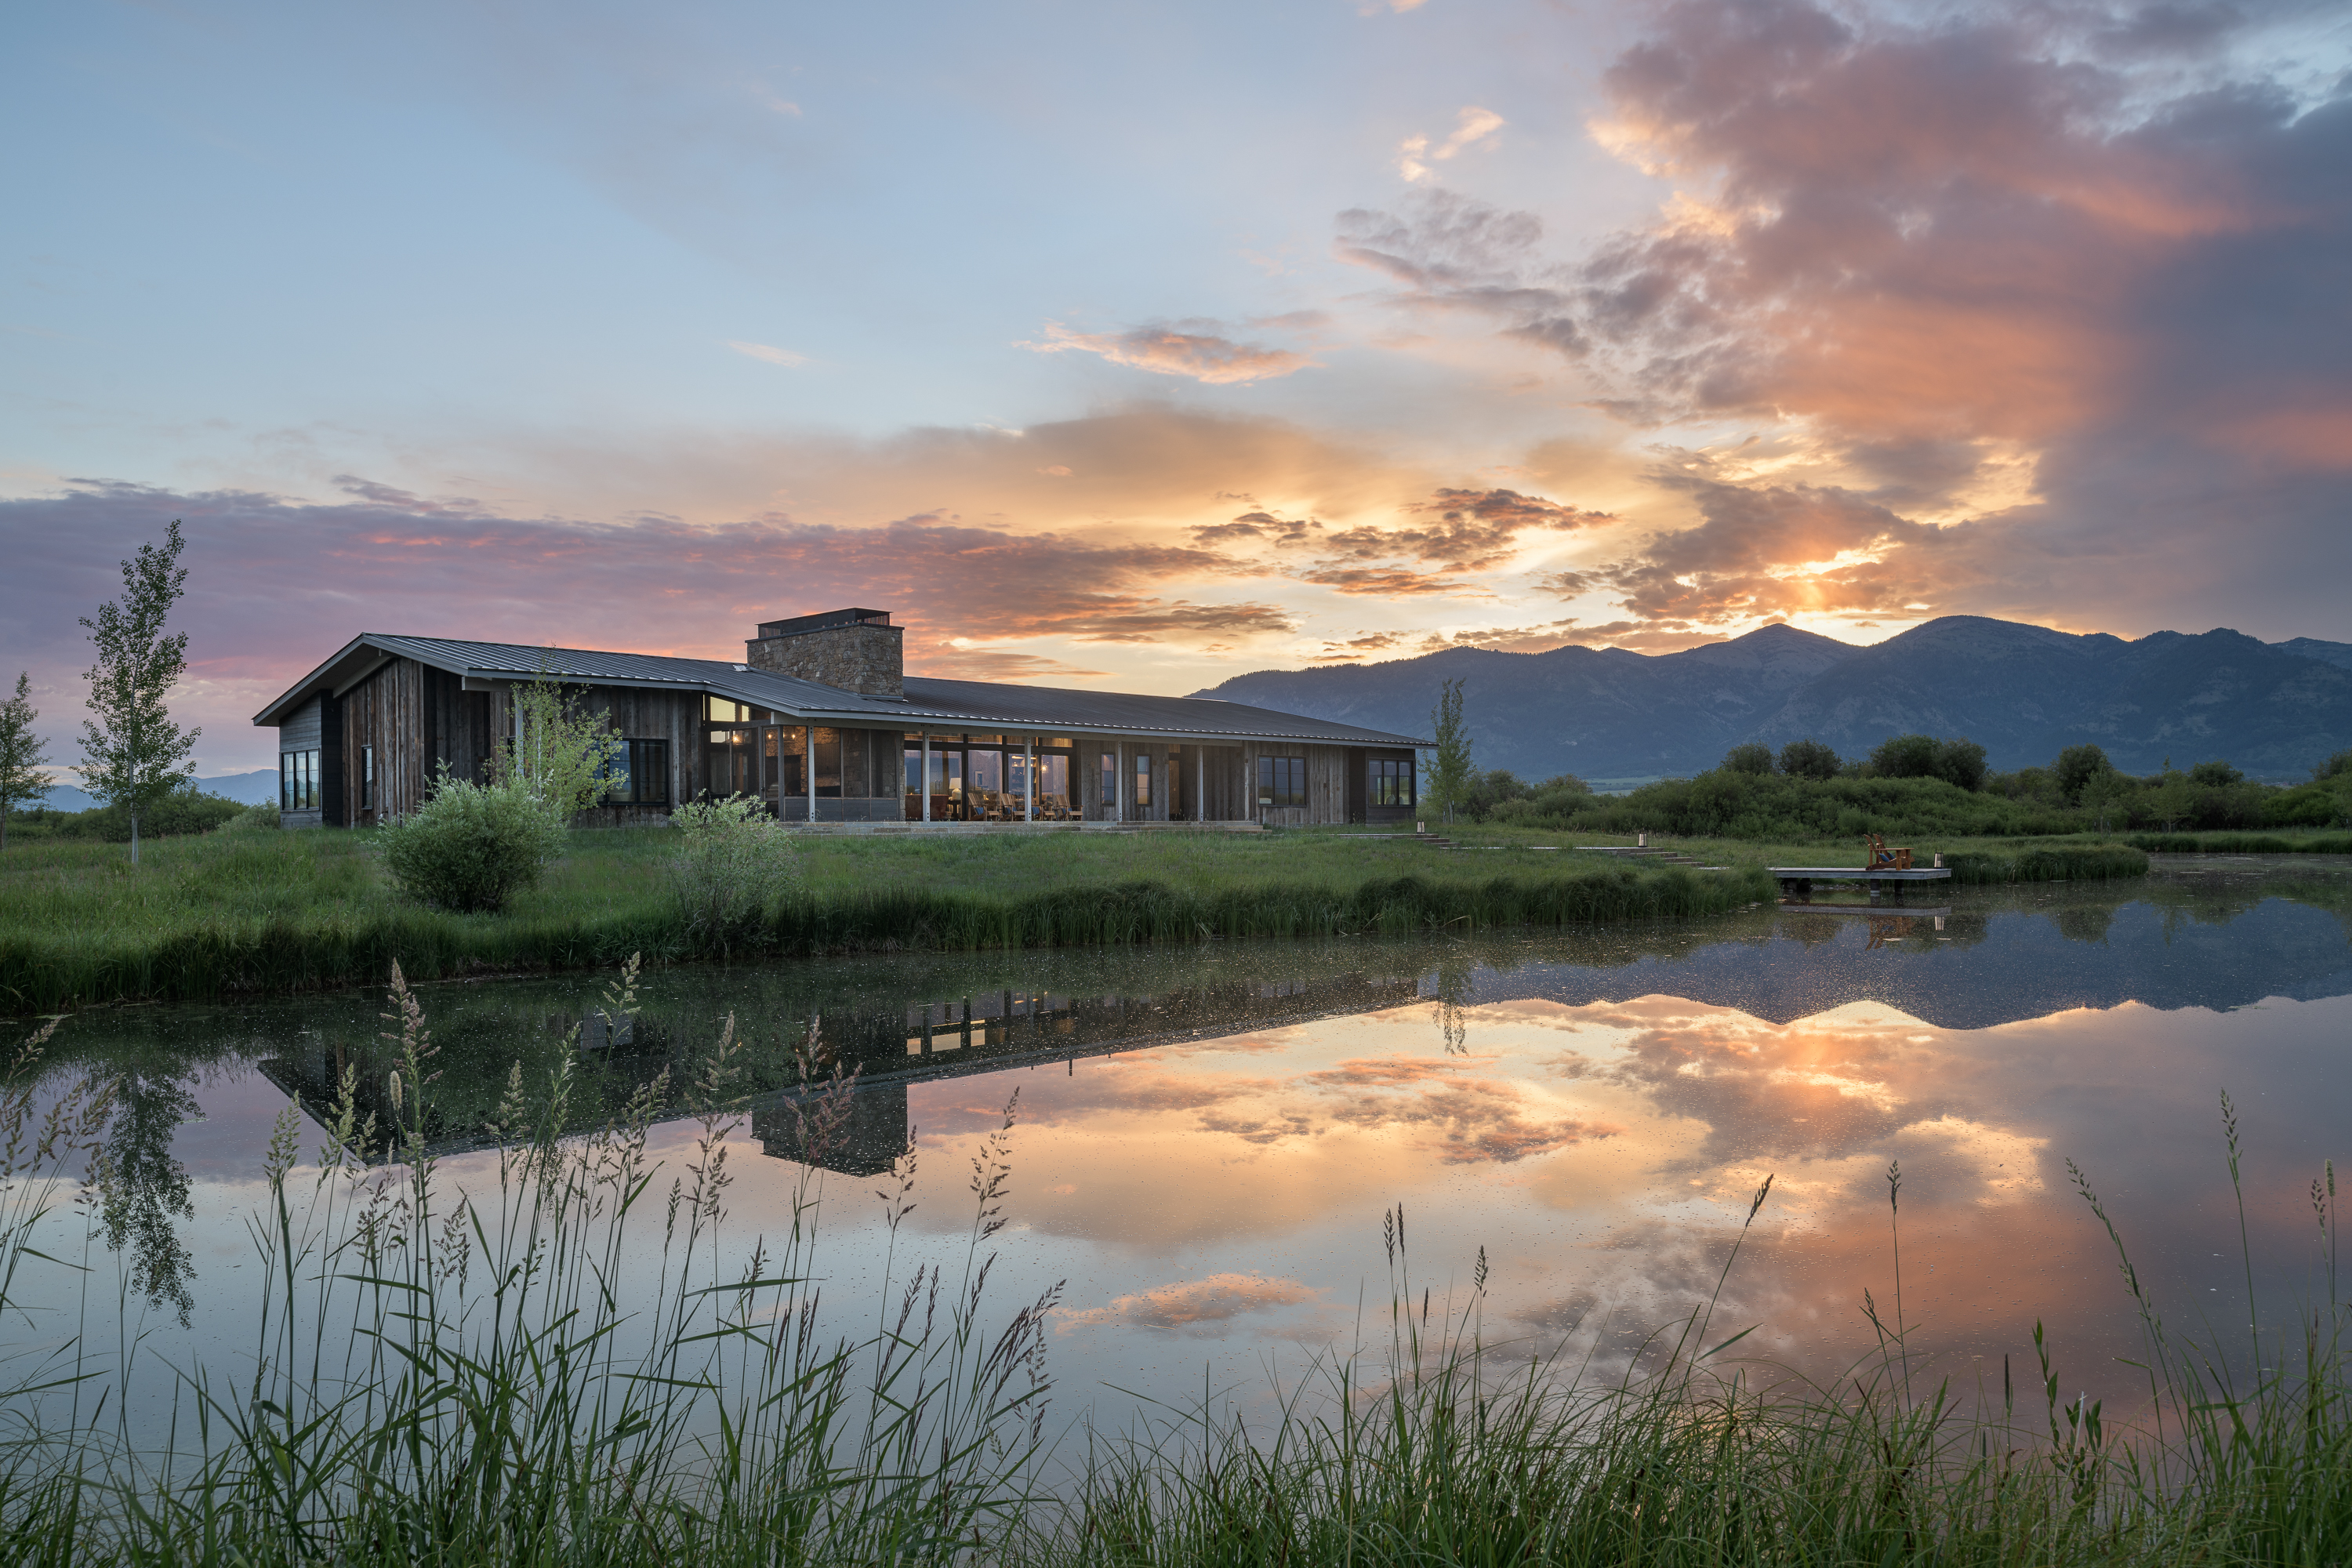 Sunset over the Wyoming Retreat, casting a dramatic reflection in the lake. The single-story ranch-style house blends into the serene landscape